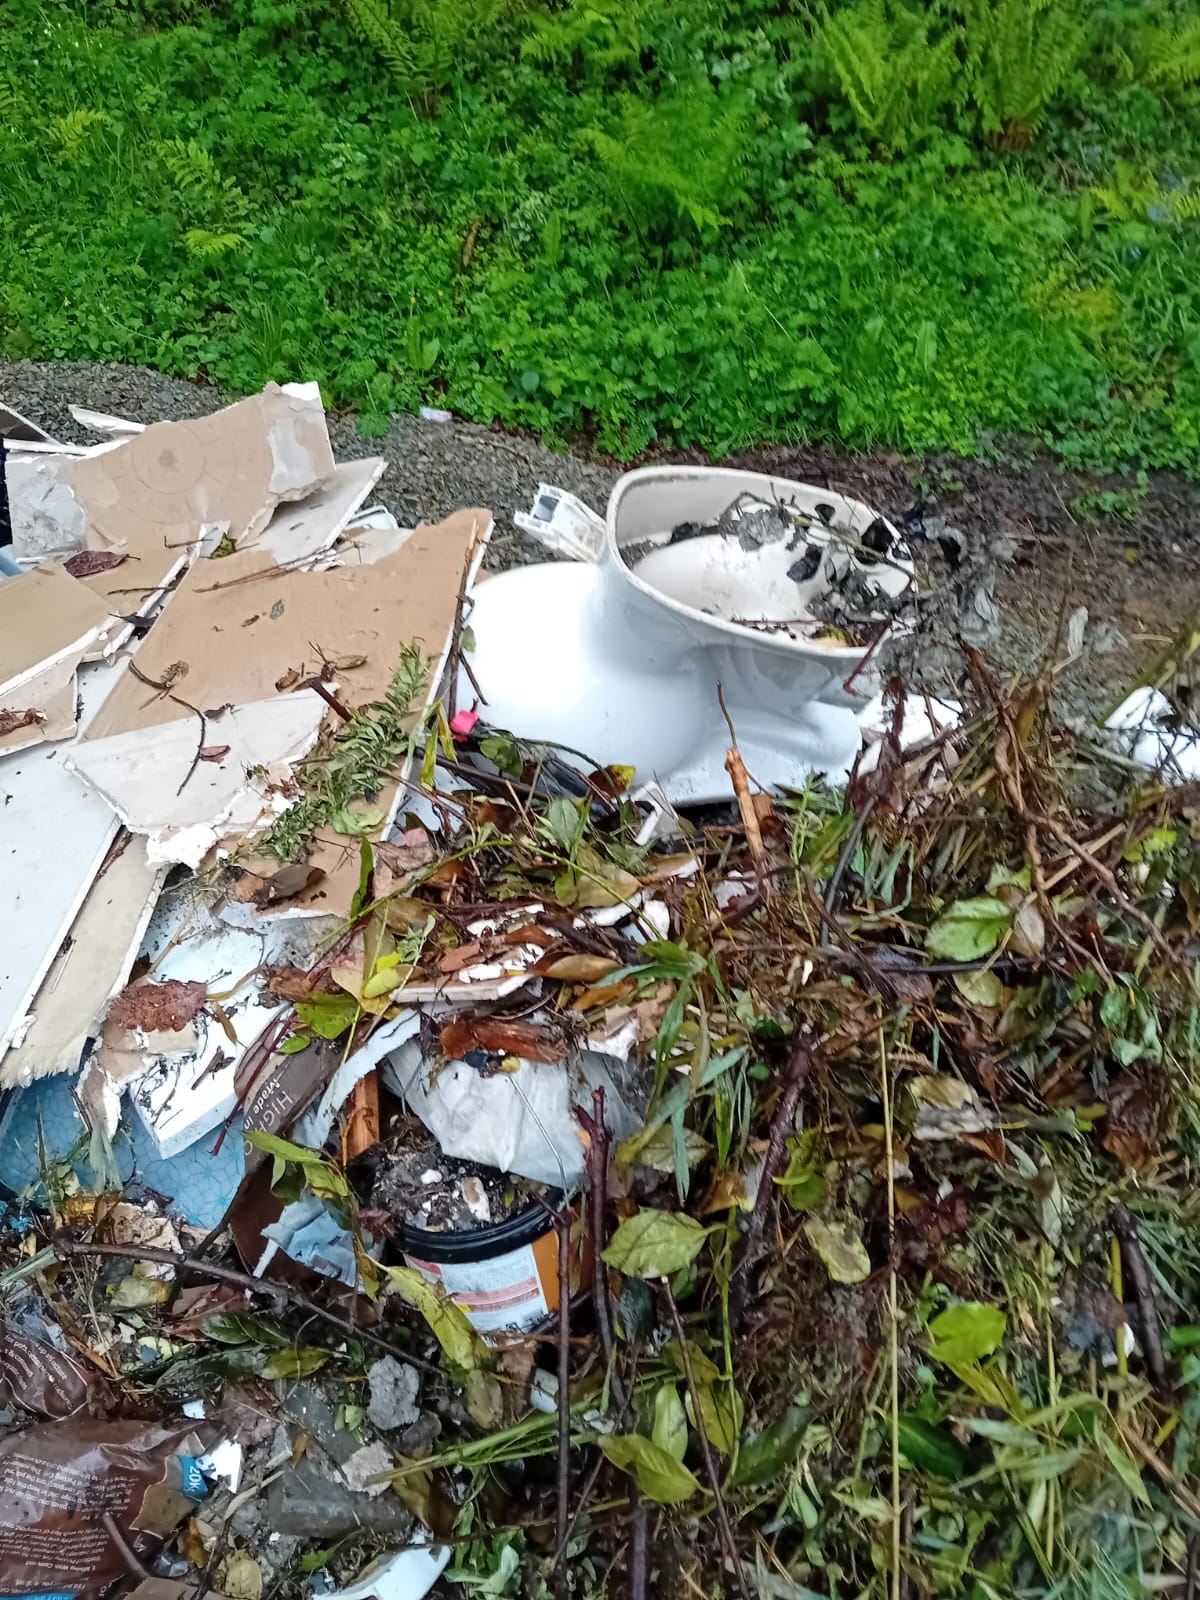 Gruesome illegal dumping in Taghmon